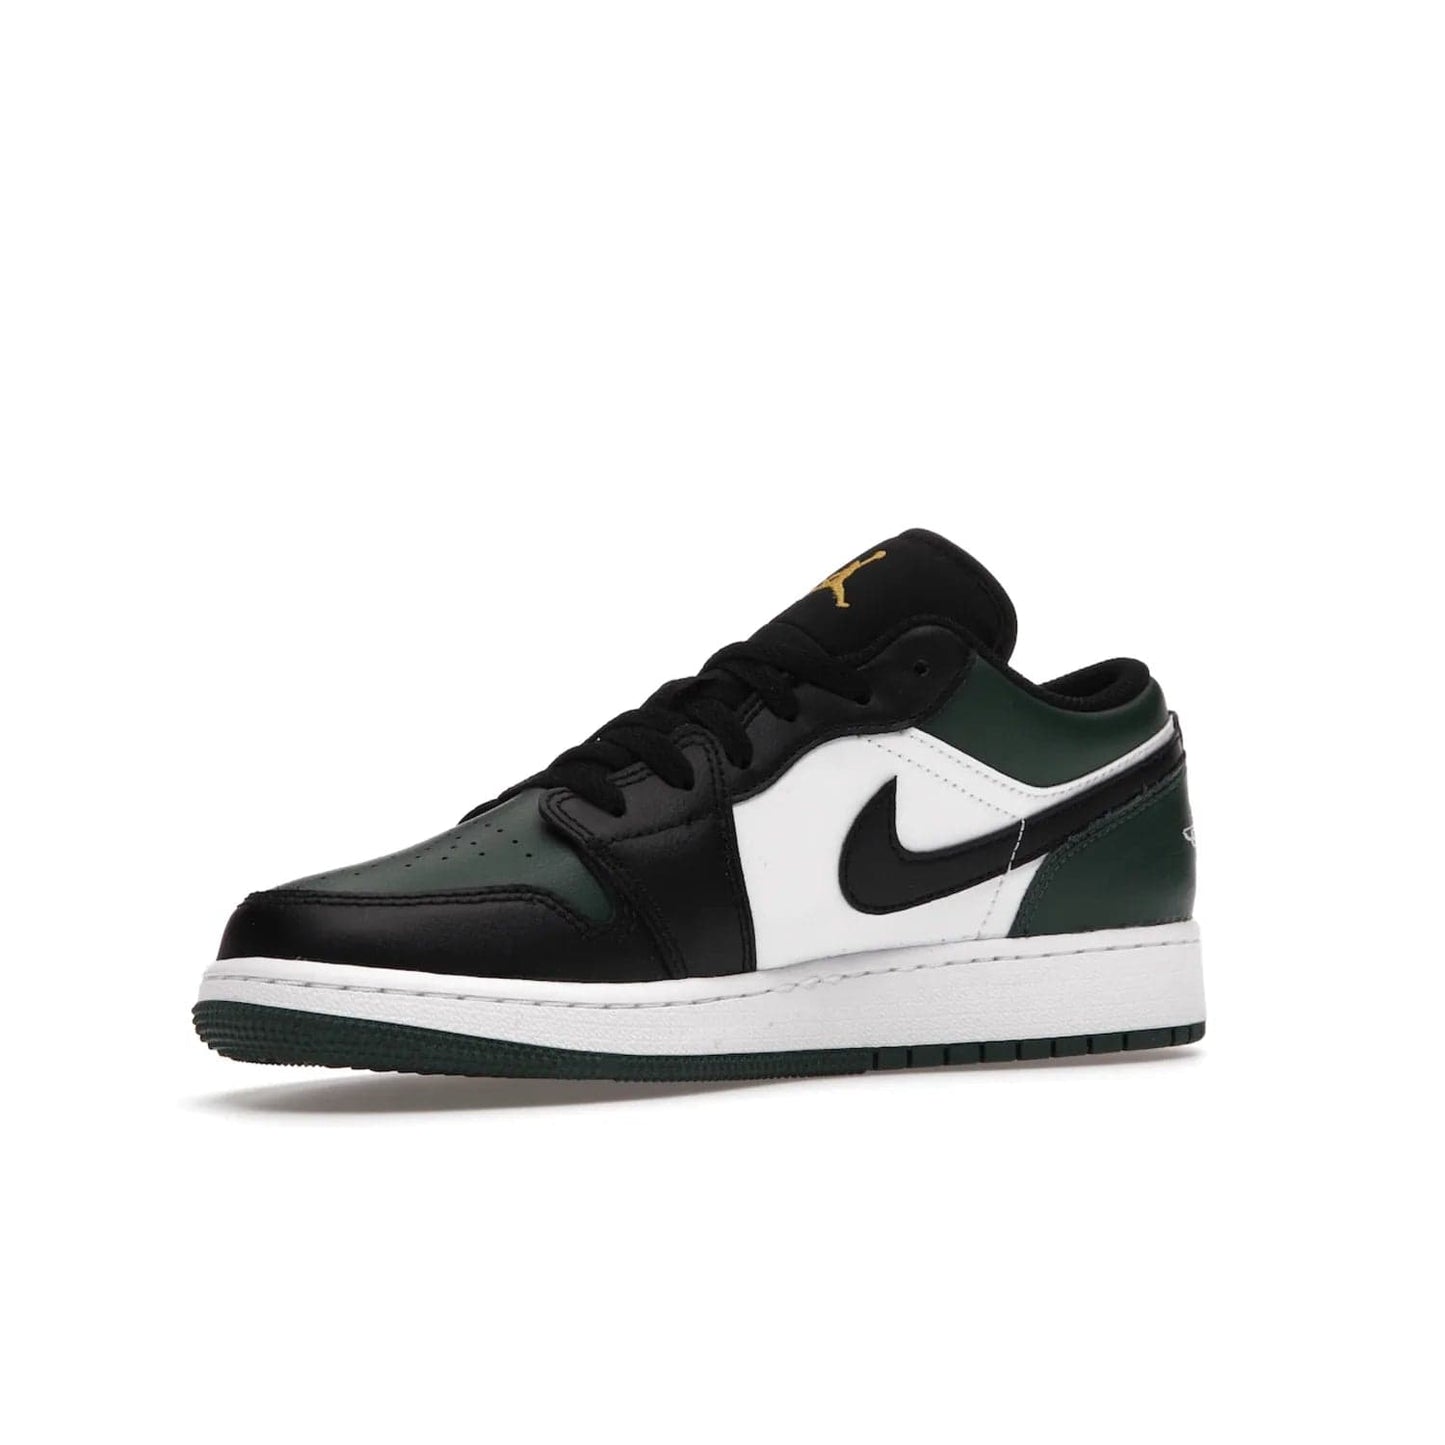 Jordan 1 Low Green Toe (GS) - Image 16 - Only at www.BallersClubKickz.com - Get the perfect low cut Jordans. Shop the Air Jordan 1 Low Noble Green GS shoes with its unique colorway and stencil Jumpman logo. Available October 2021.